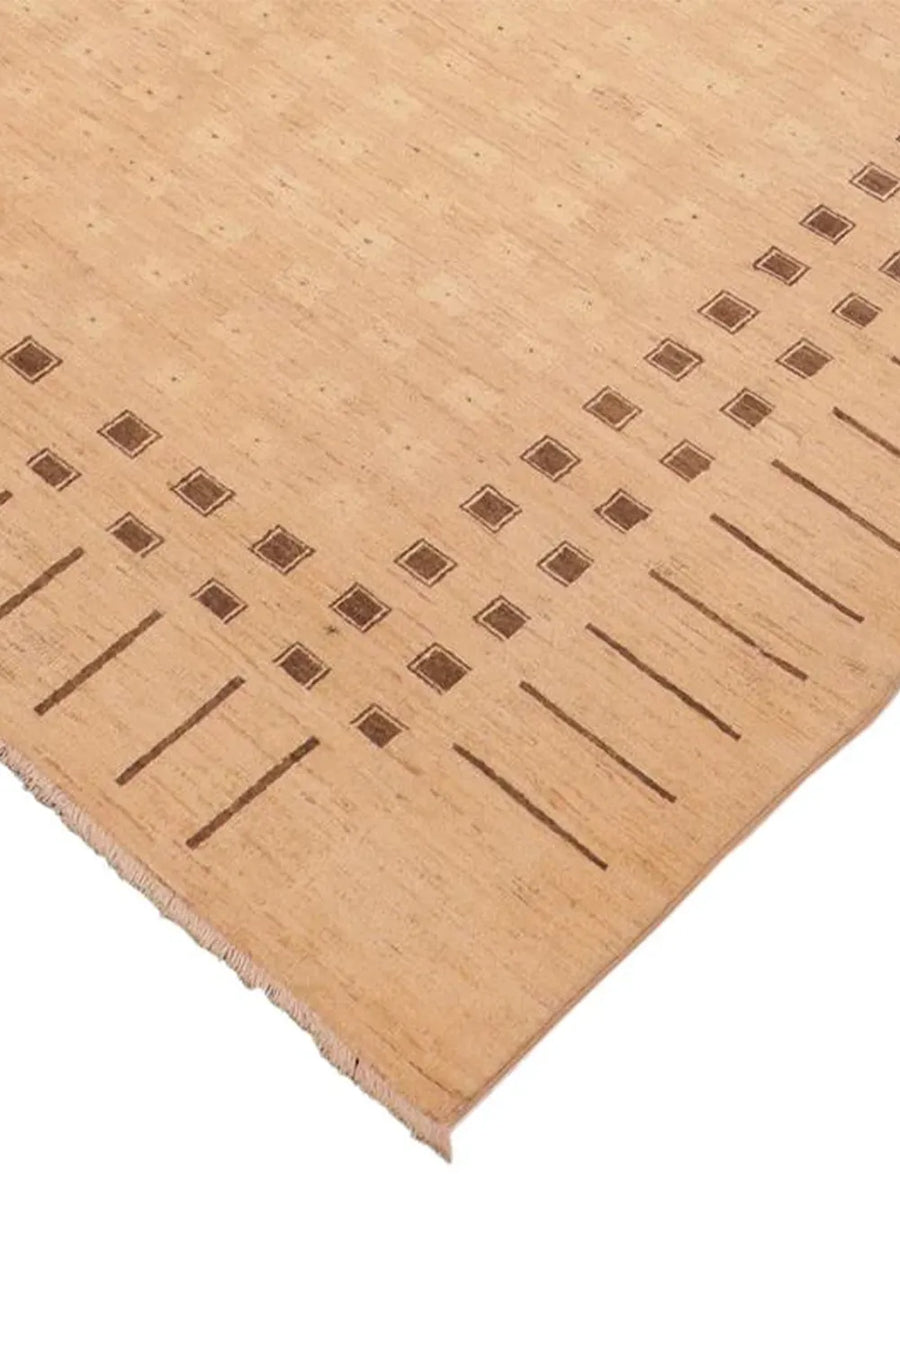 Tan modern rug with minimalist styling, hand-knotted for elegance and comfort.